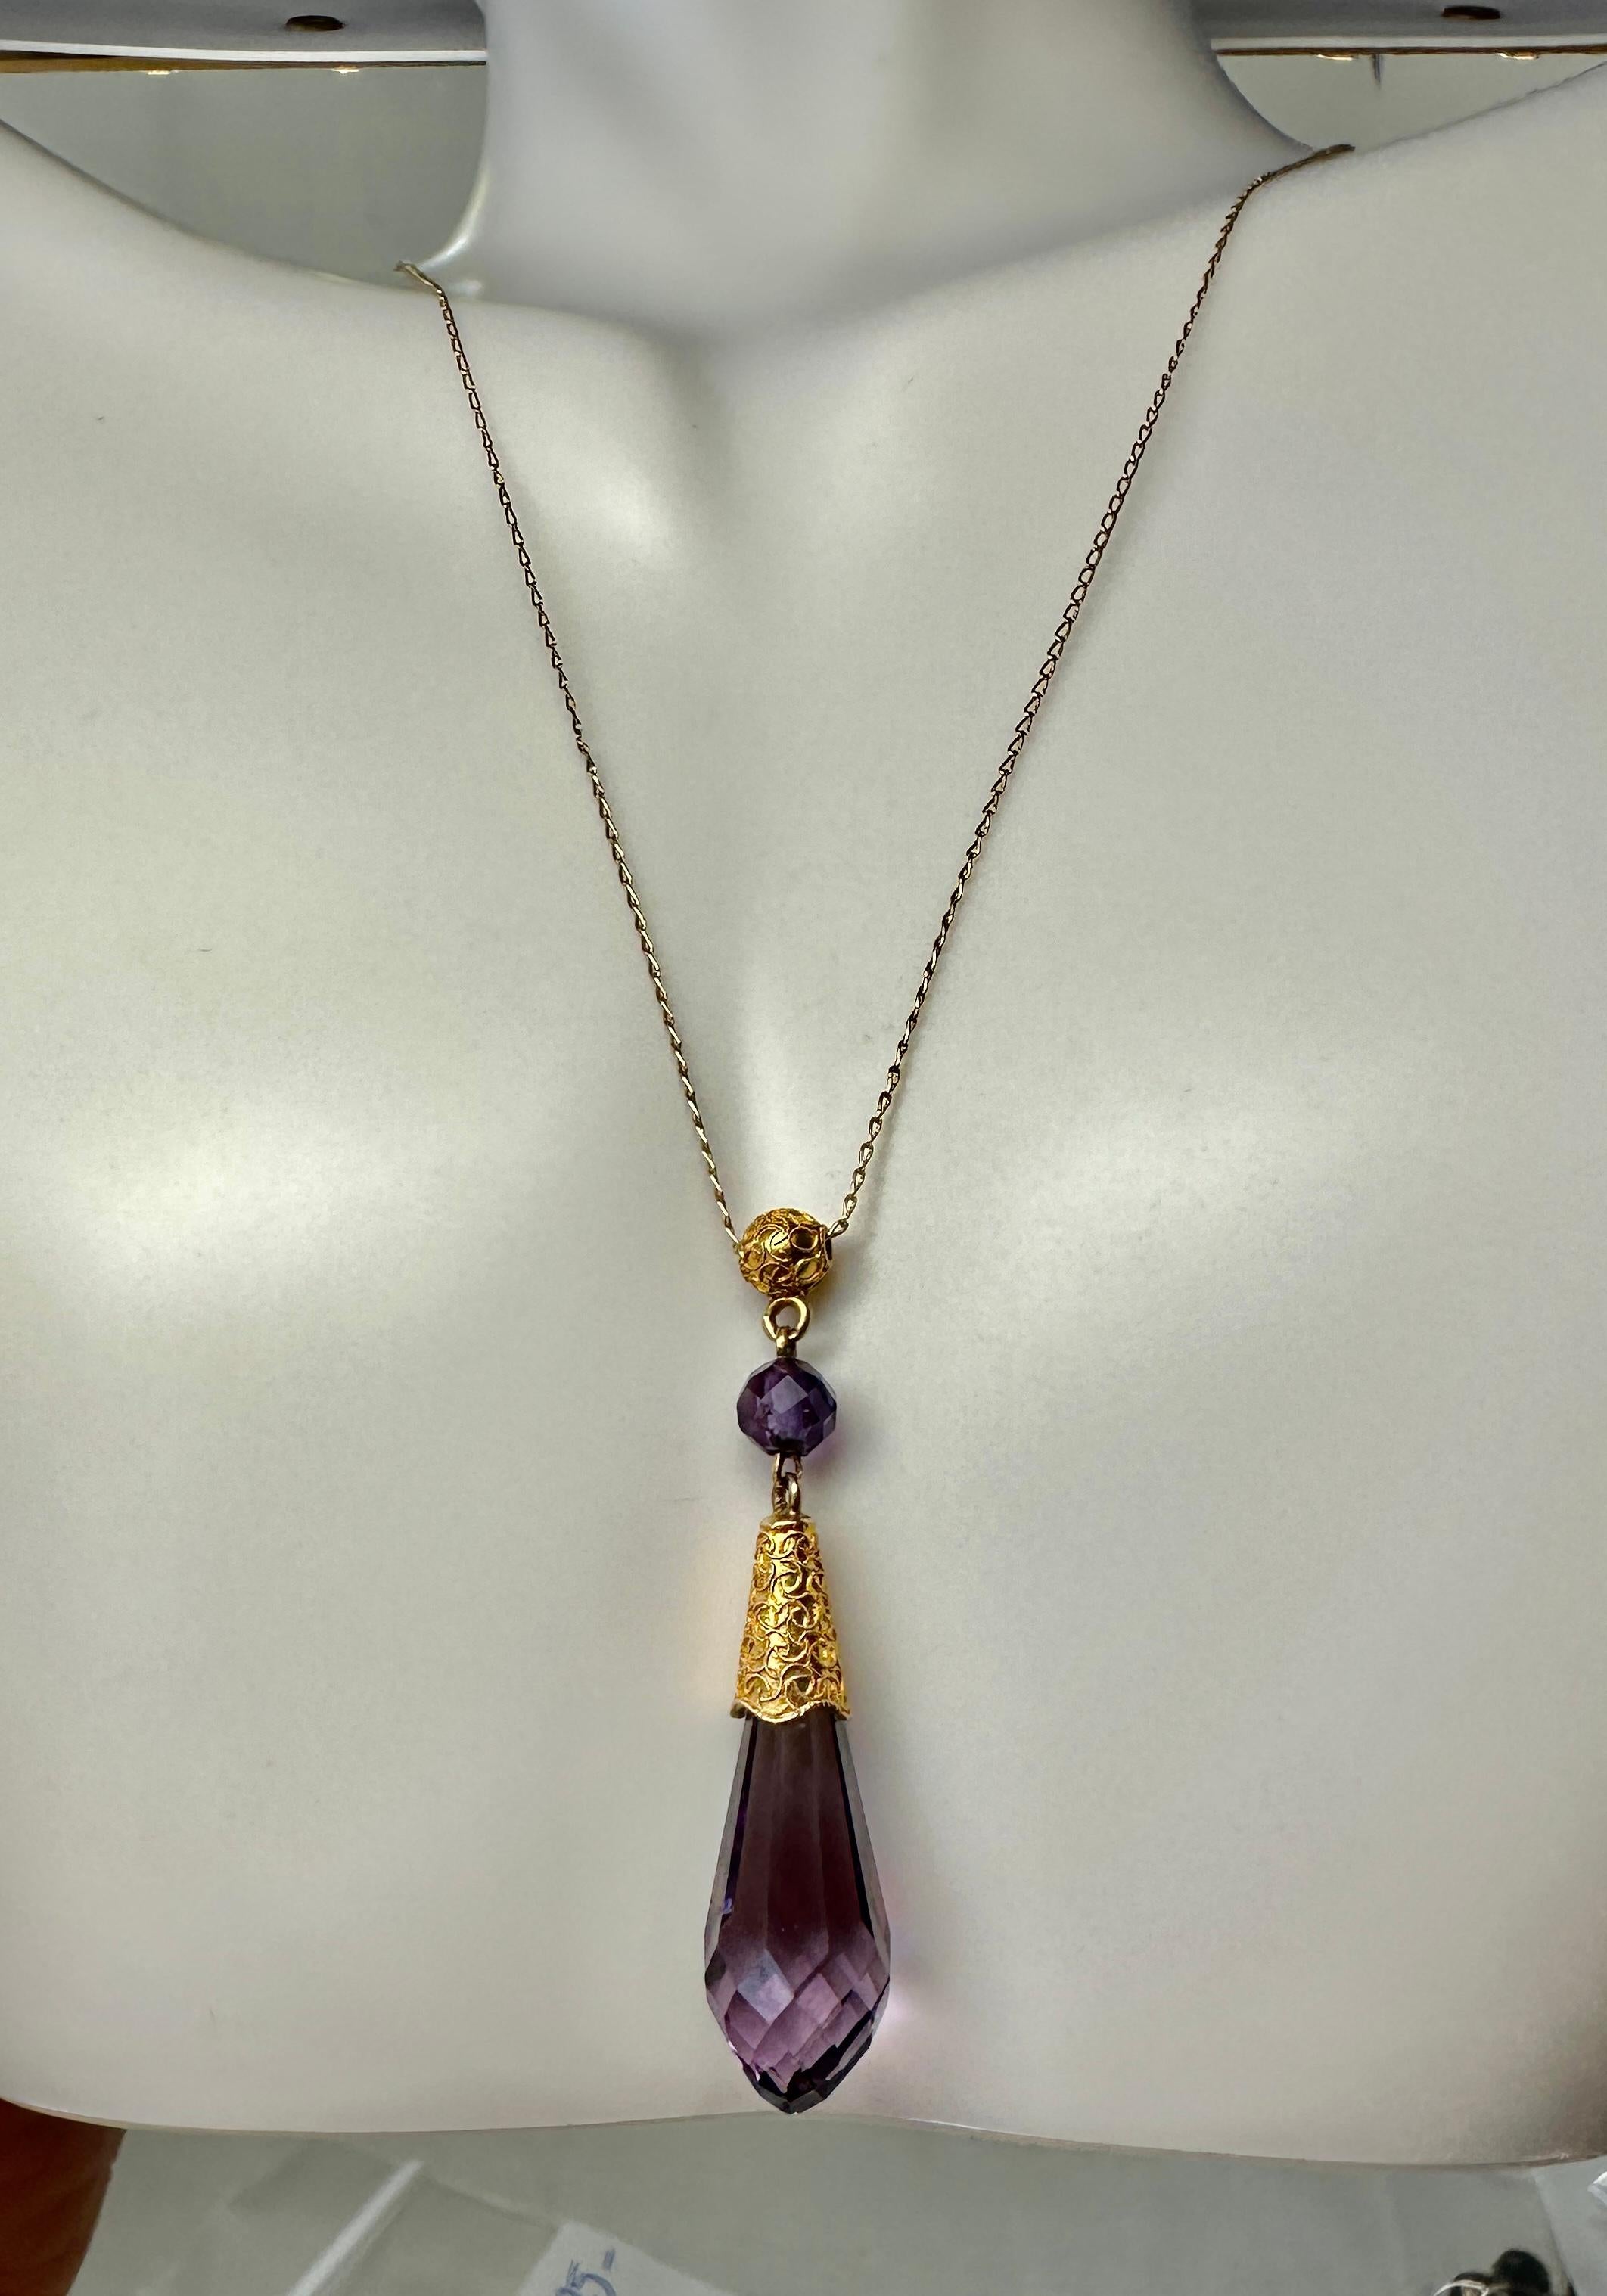 THIS IS A STUNNING ANTIQUE AMETHYST VICTORIAN ETRUSCAN REVIVAL 10-14 KARAT GOLD PENDANT NECKLACE.
The exquisite necklace has a briolette faceted natural amethyst drop with a finely decorated Etruscan hand applied bead and rope work accent surmount